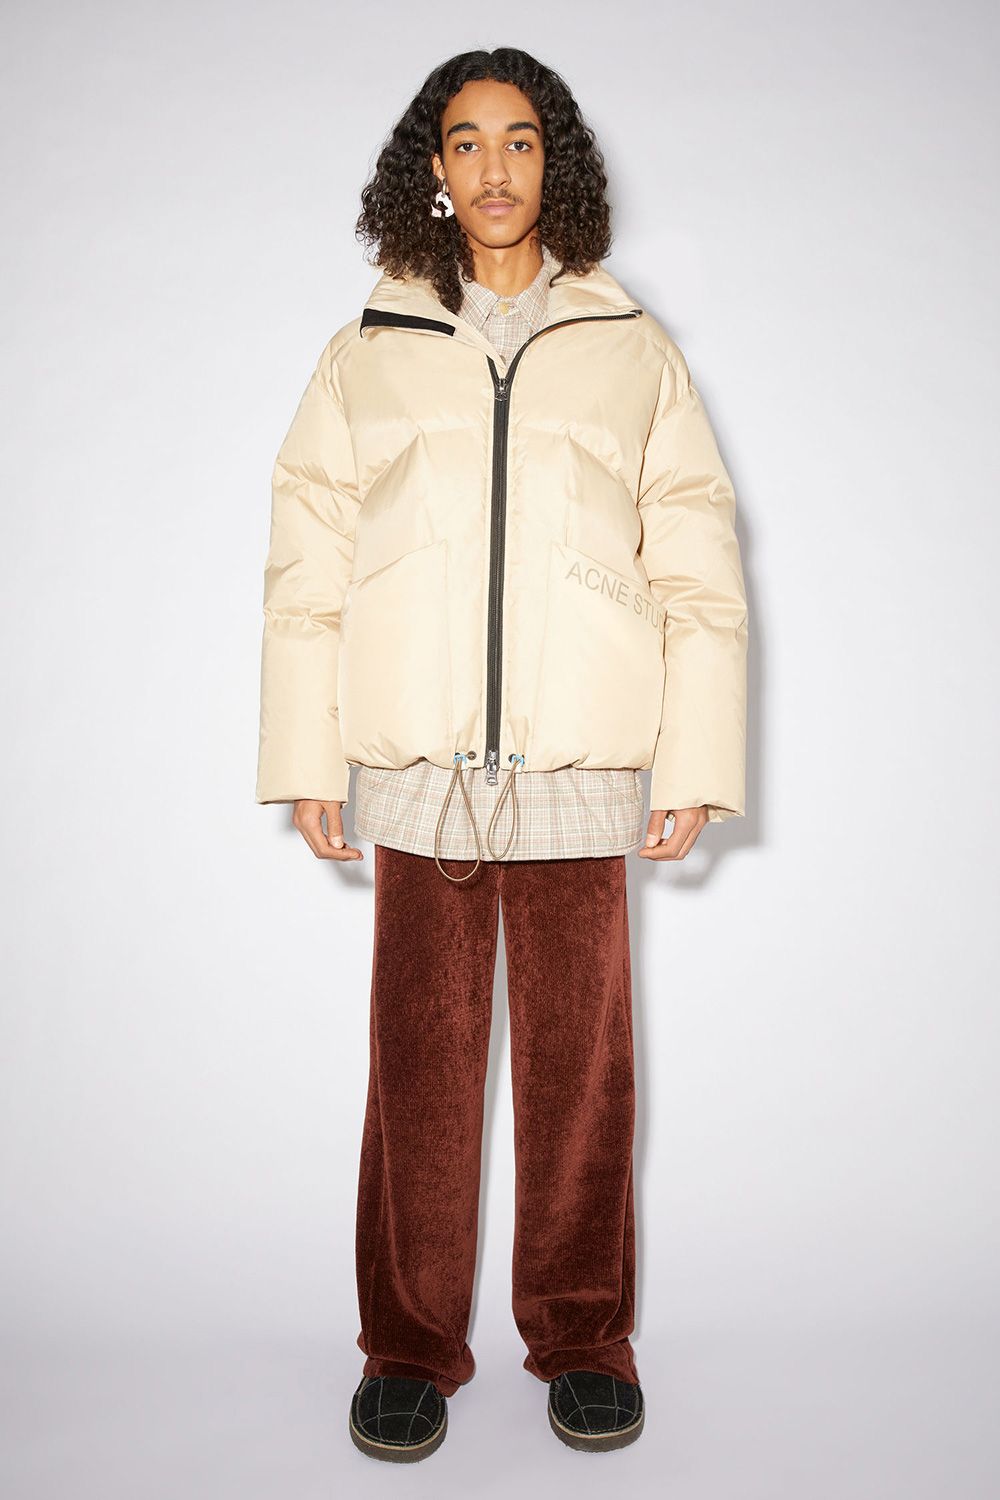 Acne Studios】21AW Delivery DIGEST #3 | Acacia ONLINESTORE